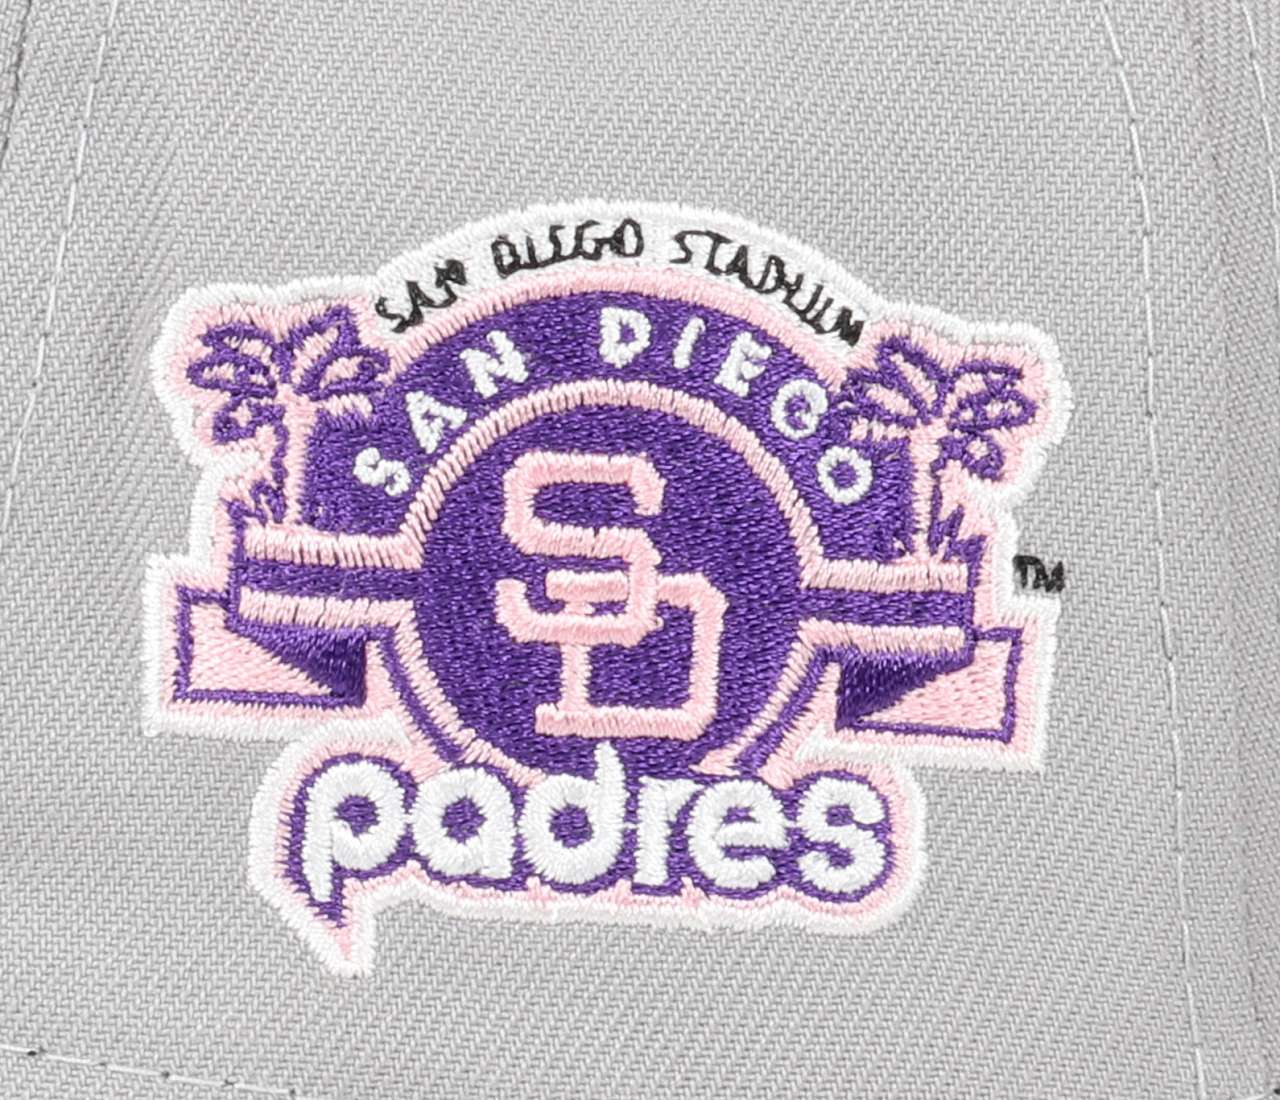 San Diego Padres MLB Cooperstown San Diego Stadium Sidepatch Gray Black 9Forty A-Frame Adjustable Cap New Era